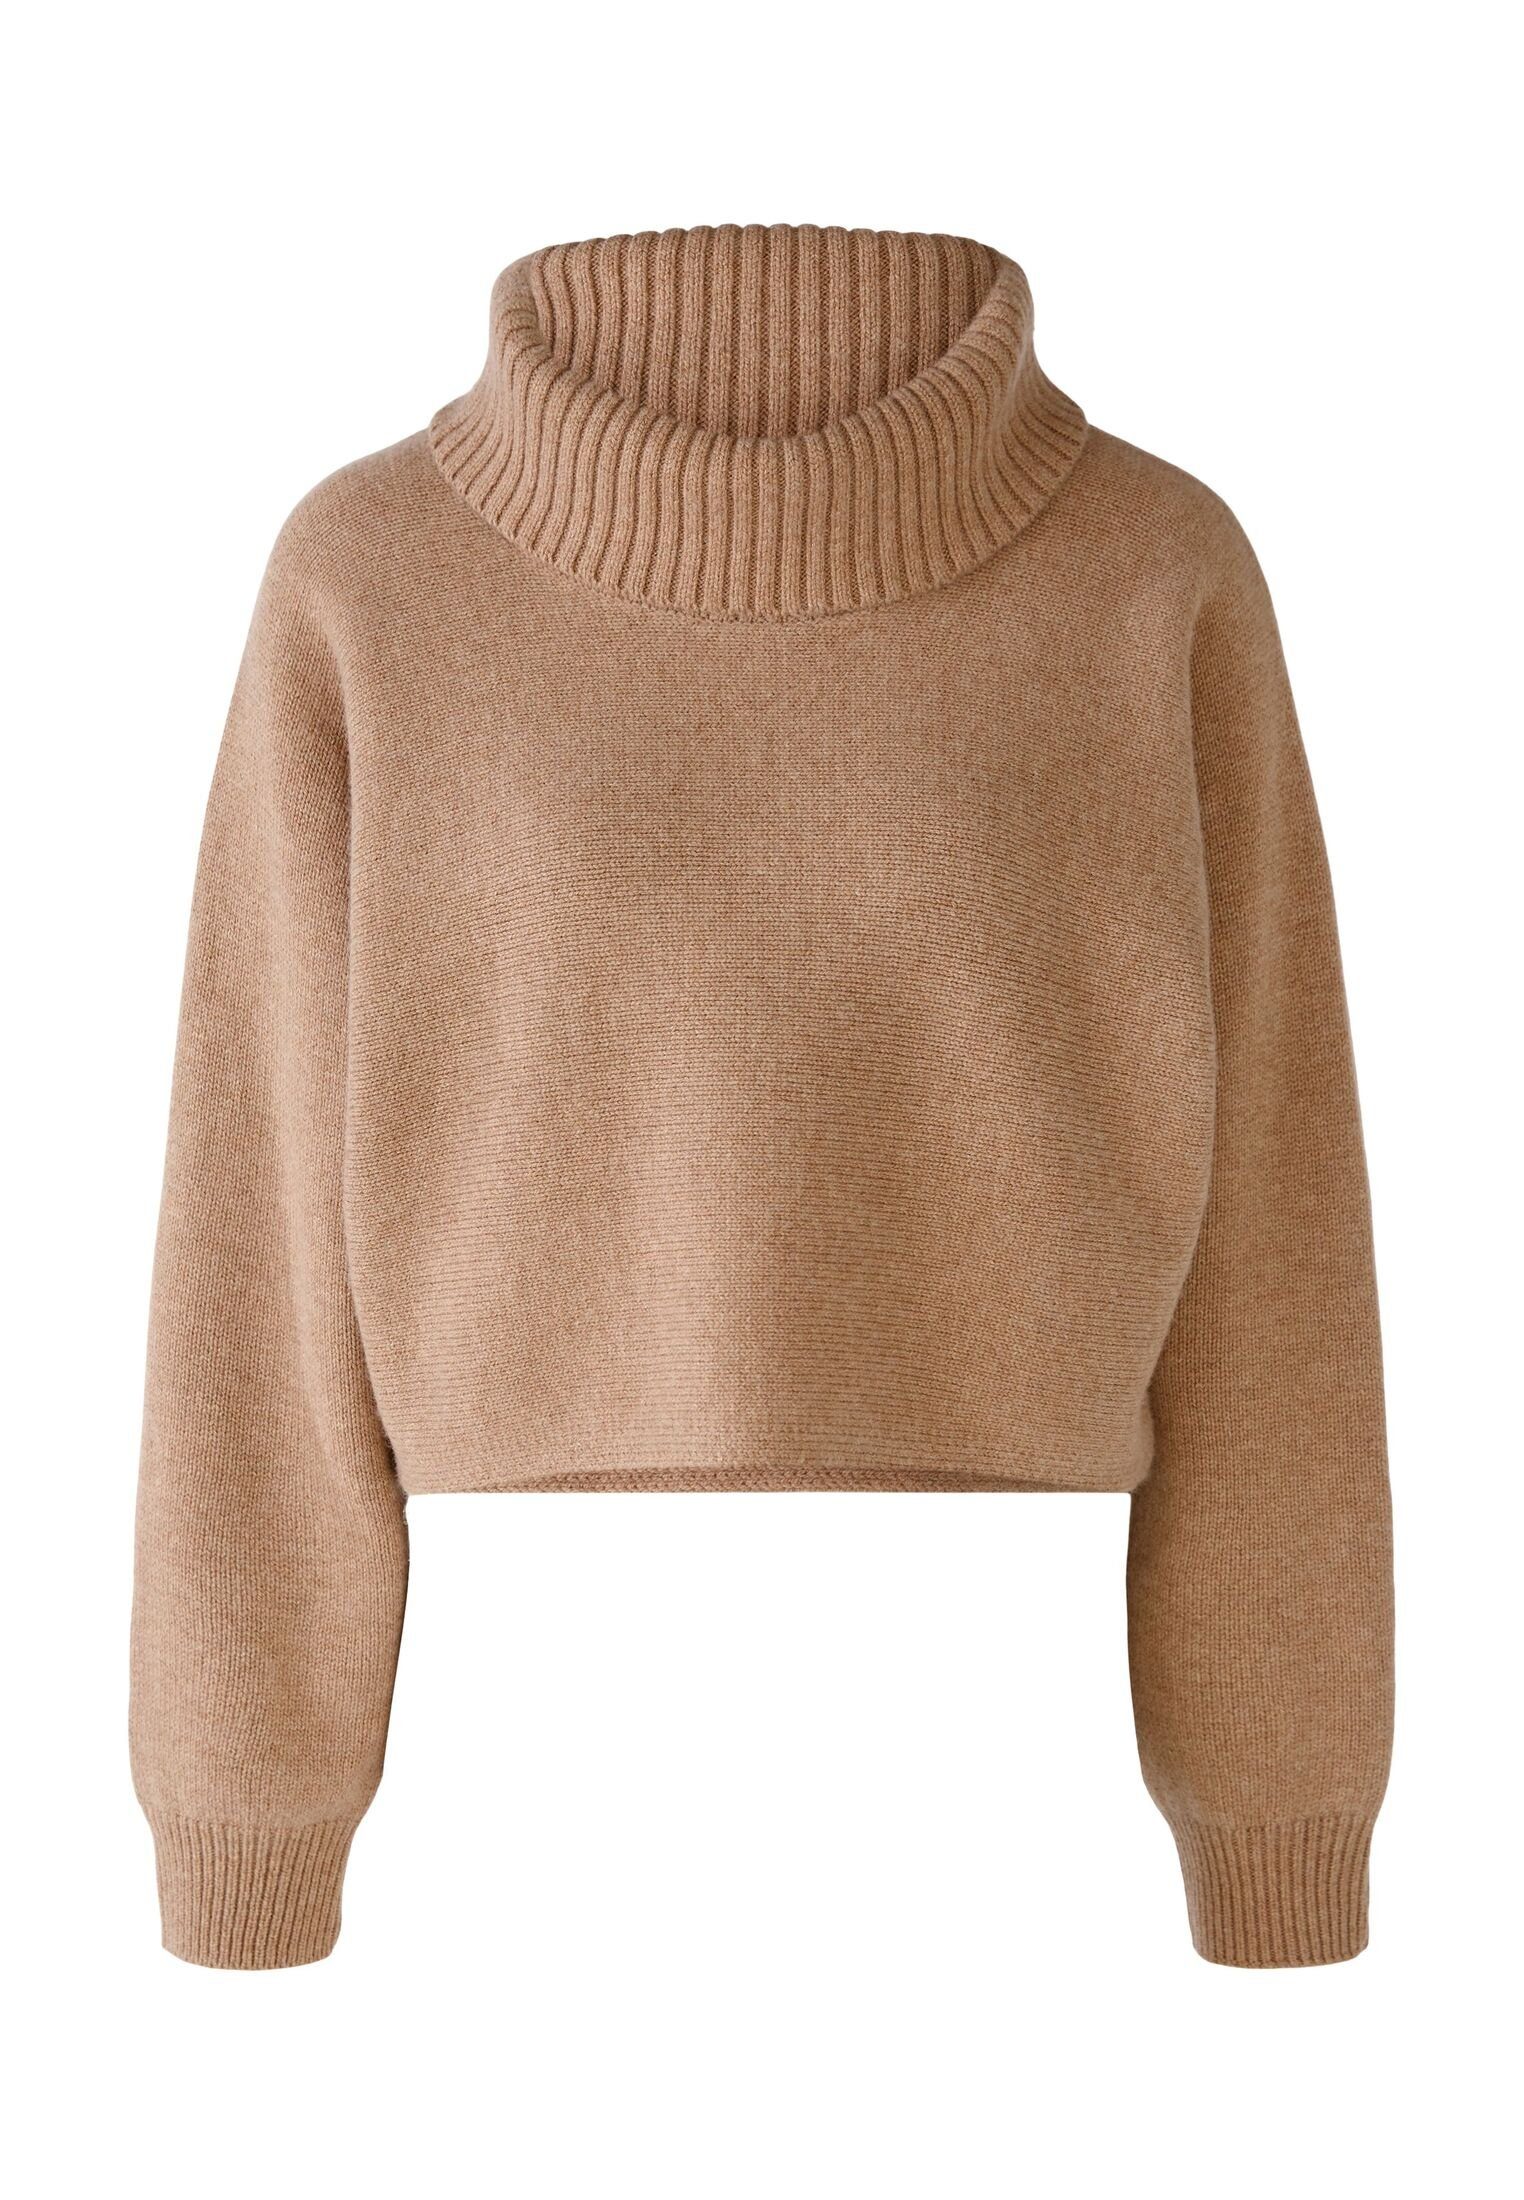 Oui Strickpullover Pullover Wollmischung camel | 